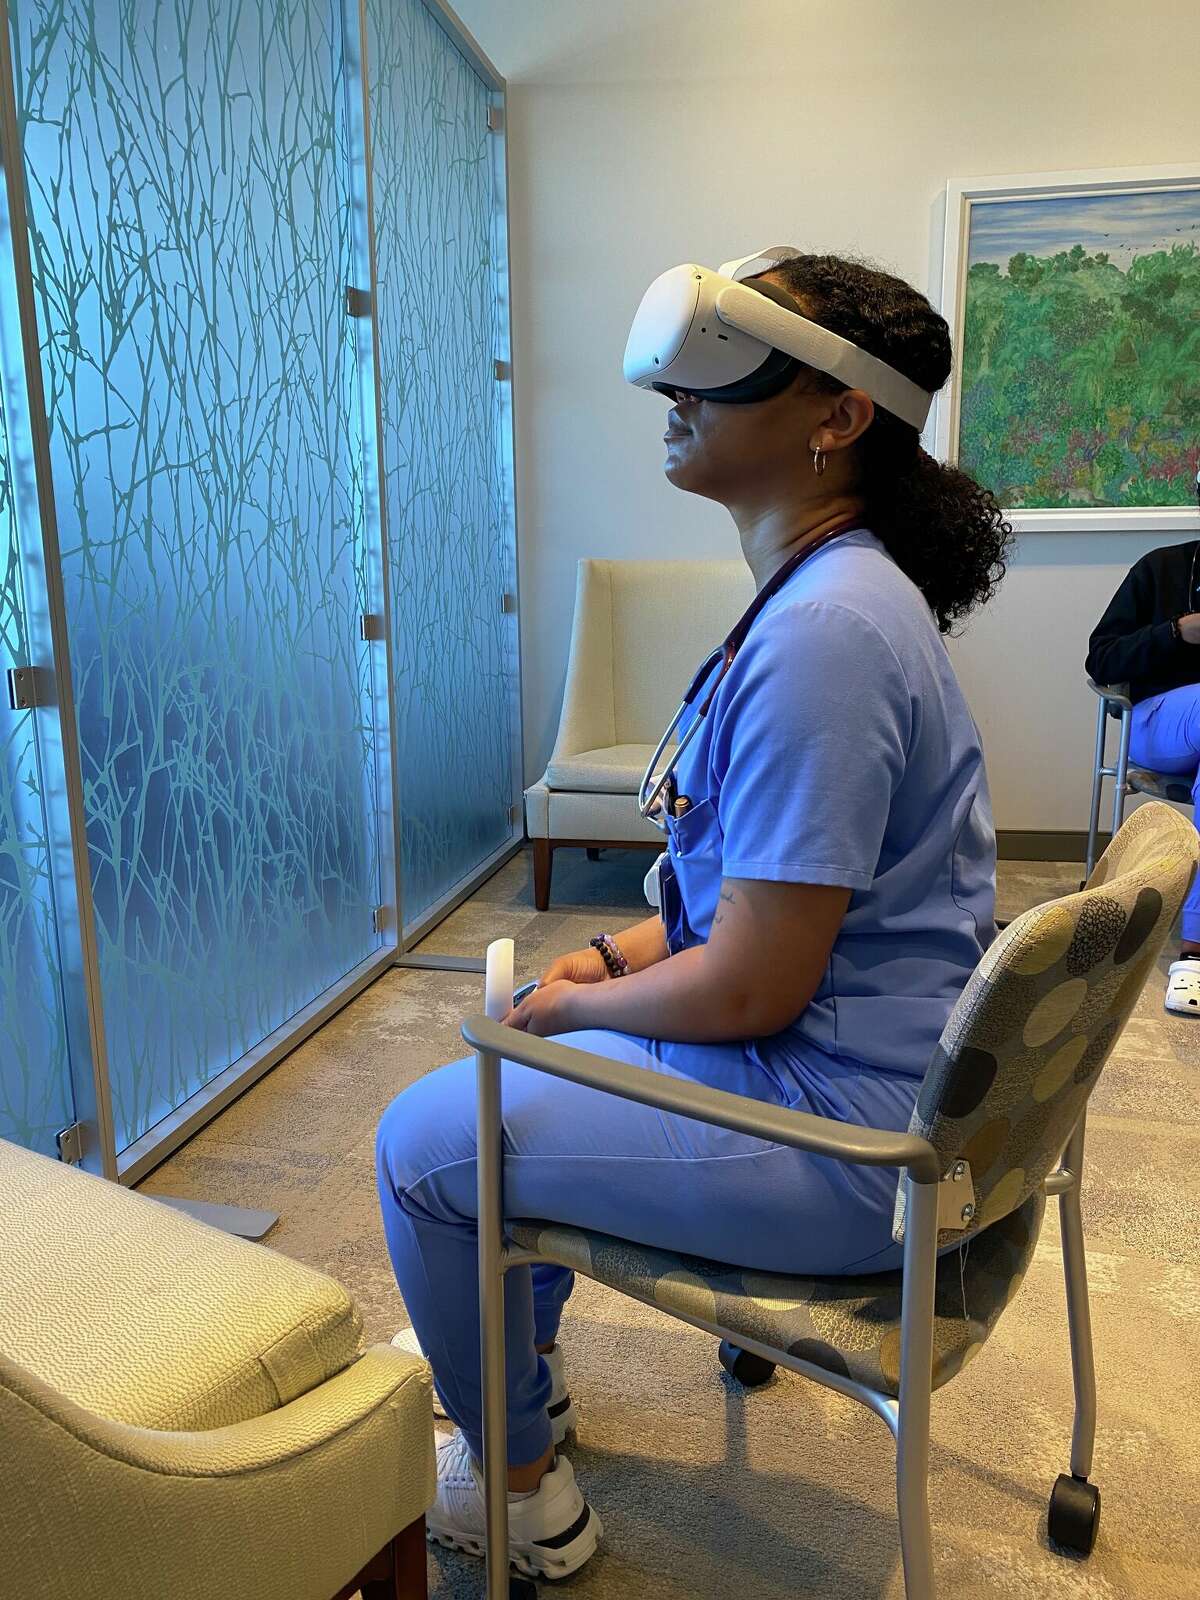 Stamford Health launched a new program on Jan. 25 with Oxford Medical Simulation that aims to let nurses hone their skills on virtual reality patients in the Metaverse. 